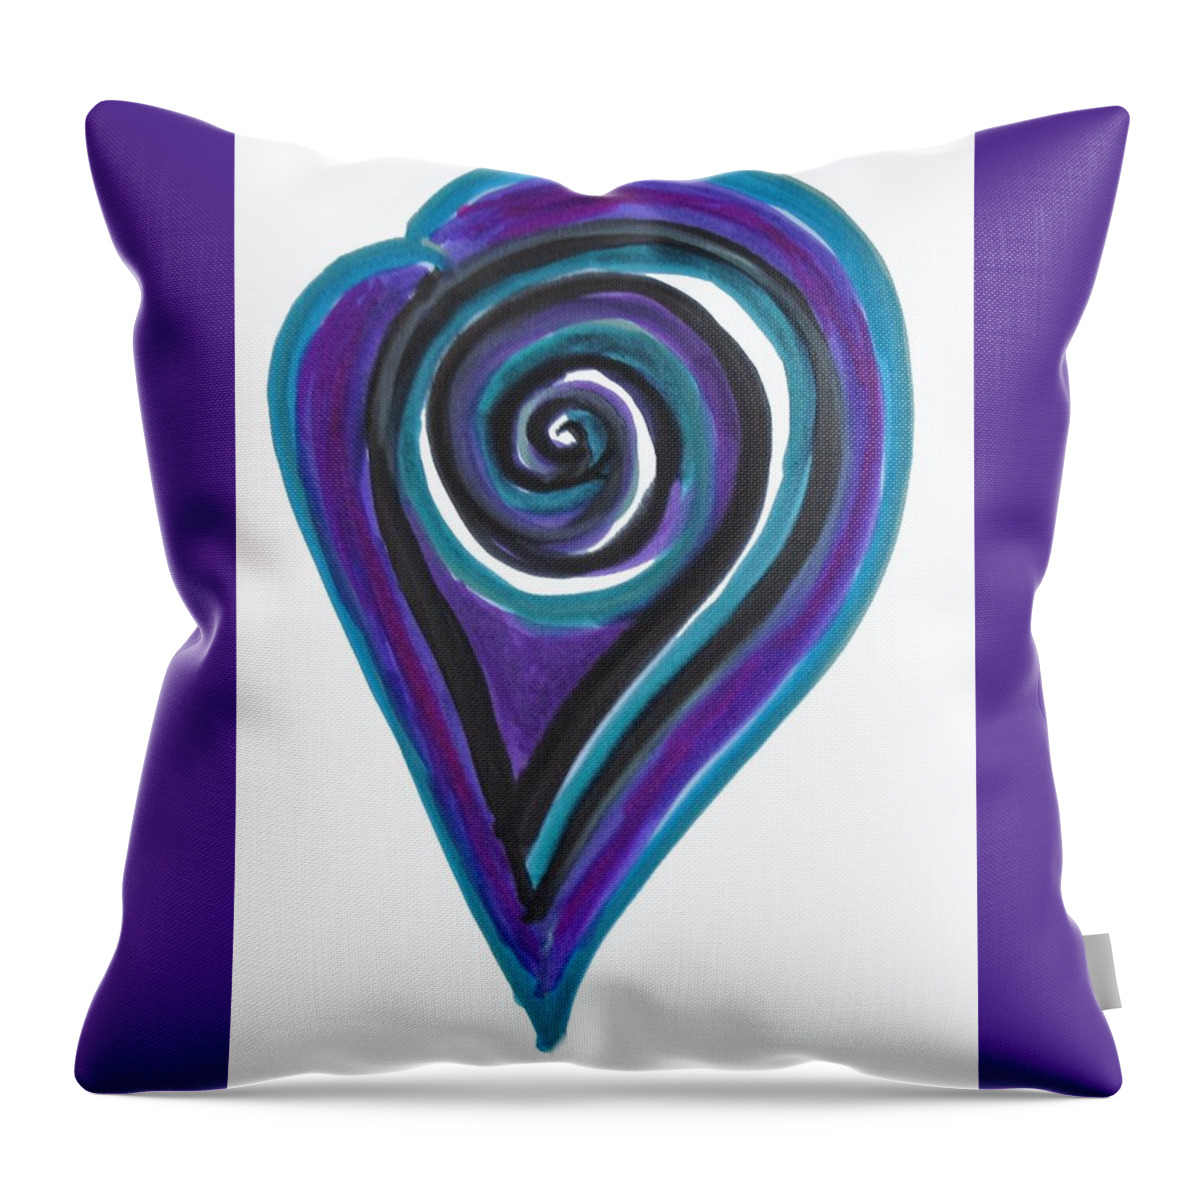 Vortex Throw Pillow featuring the drawing Vortex Wave by Mars Besso